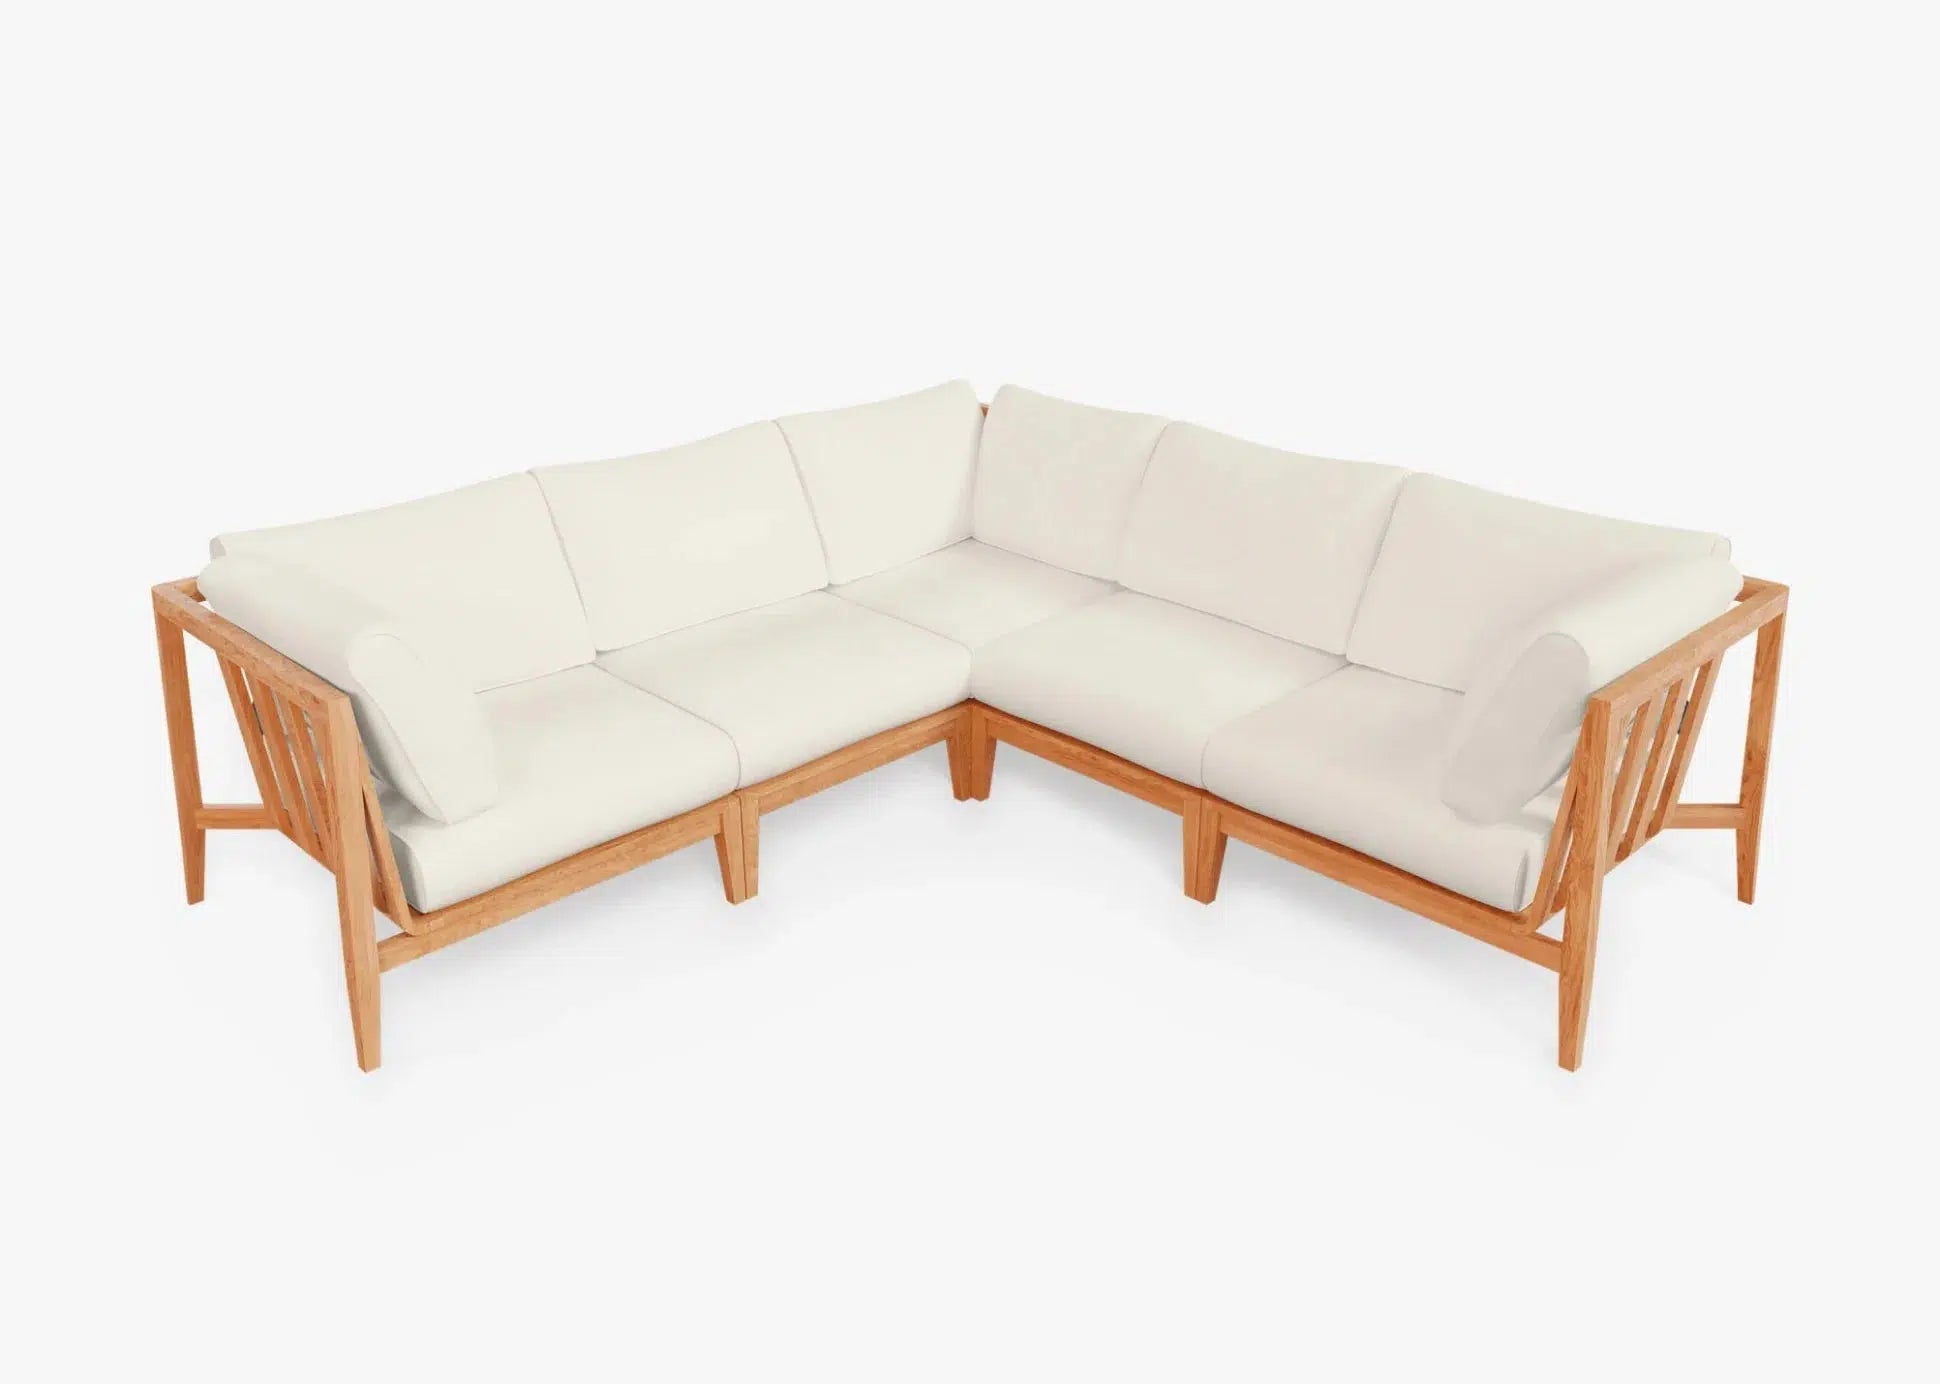 Live Outer 98" x 98" Teak Outdoor Corner Sectional 5-Seat With Palisades Cream Cushion